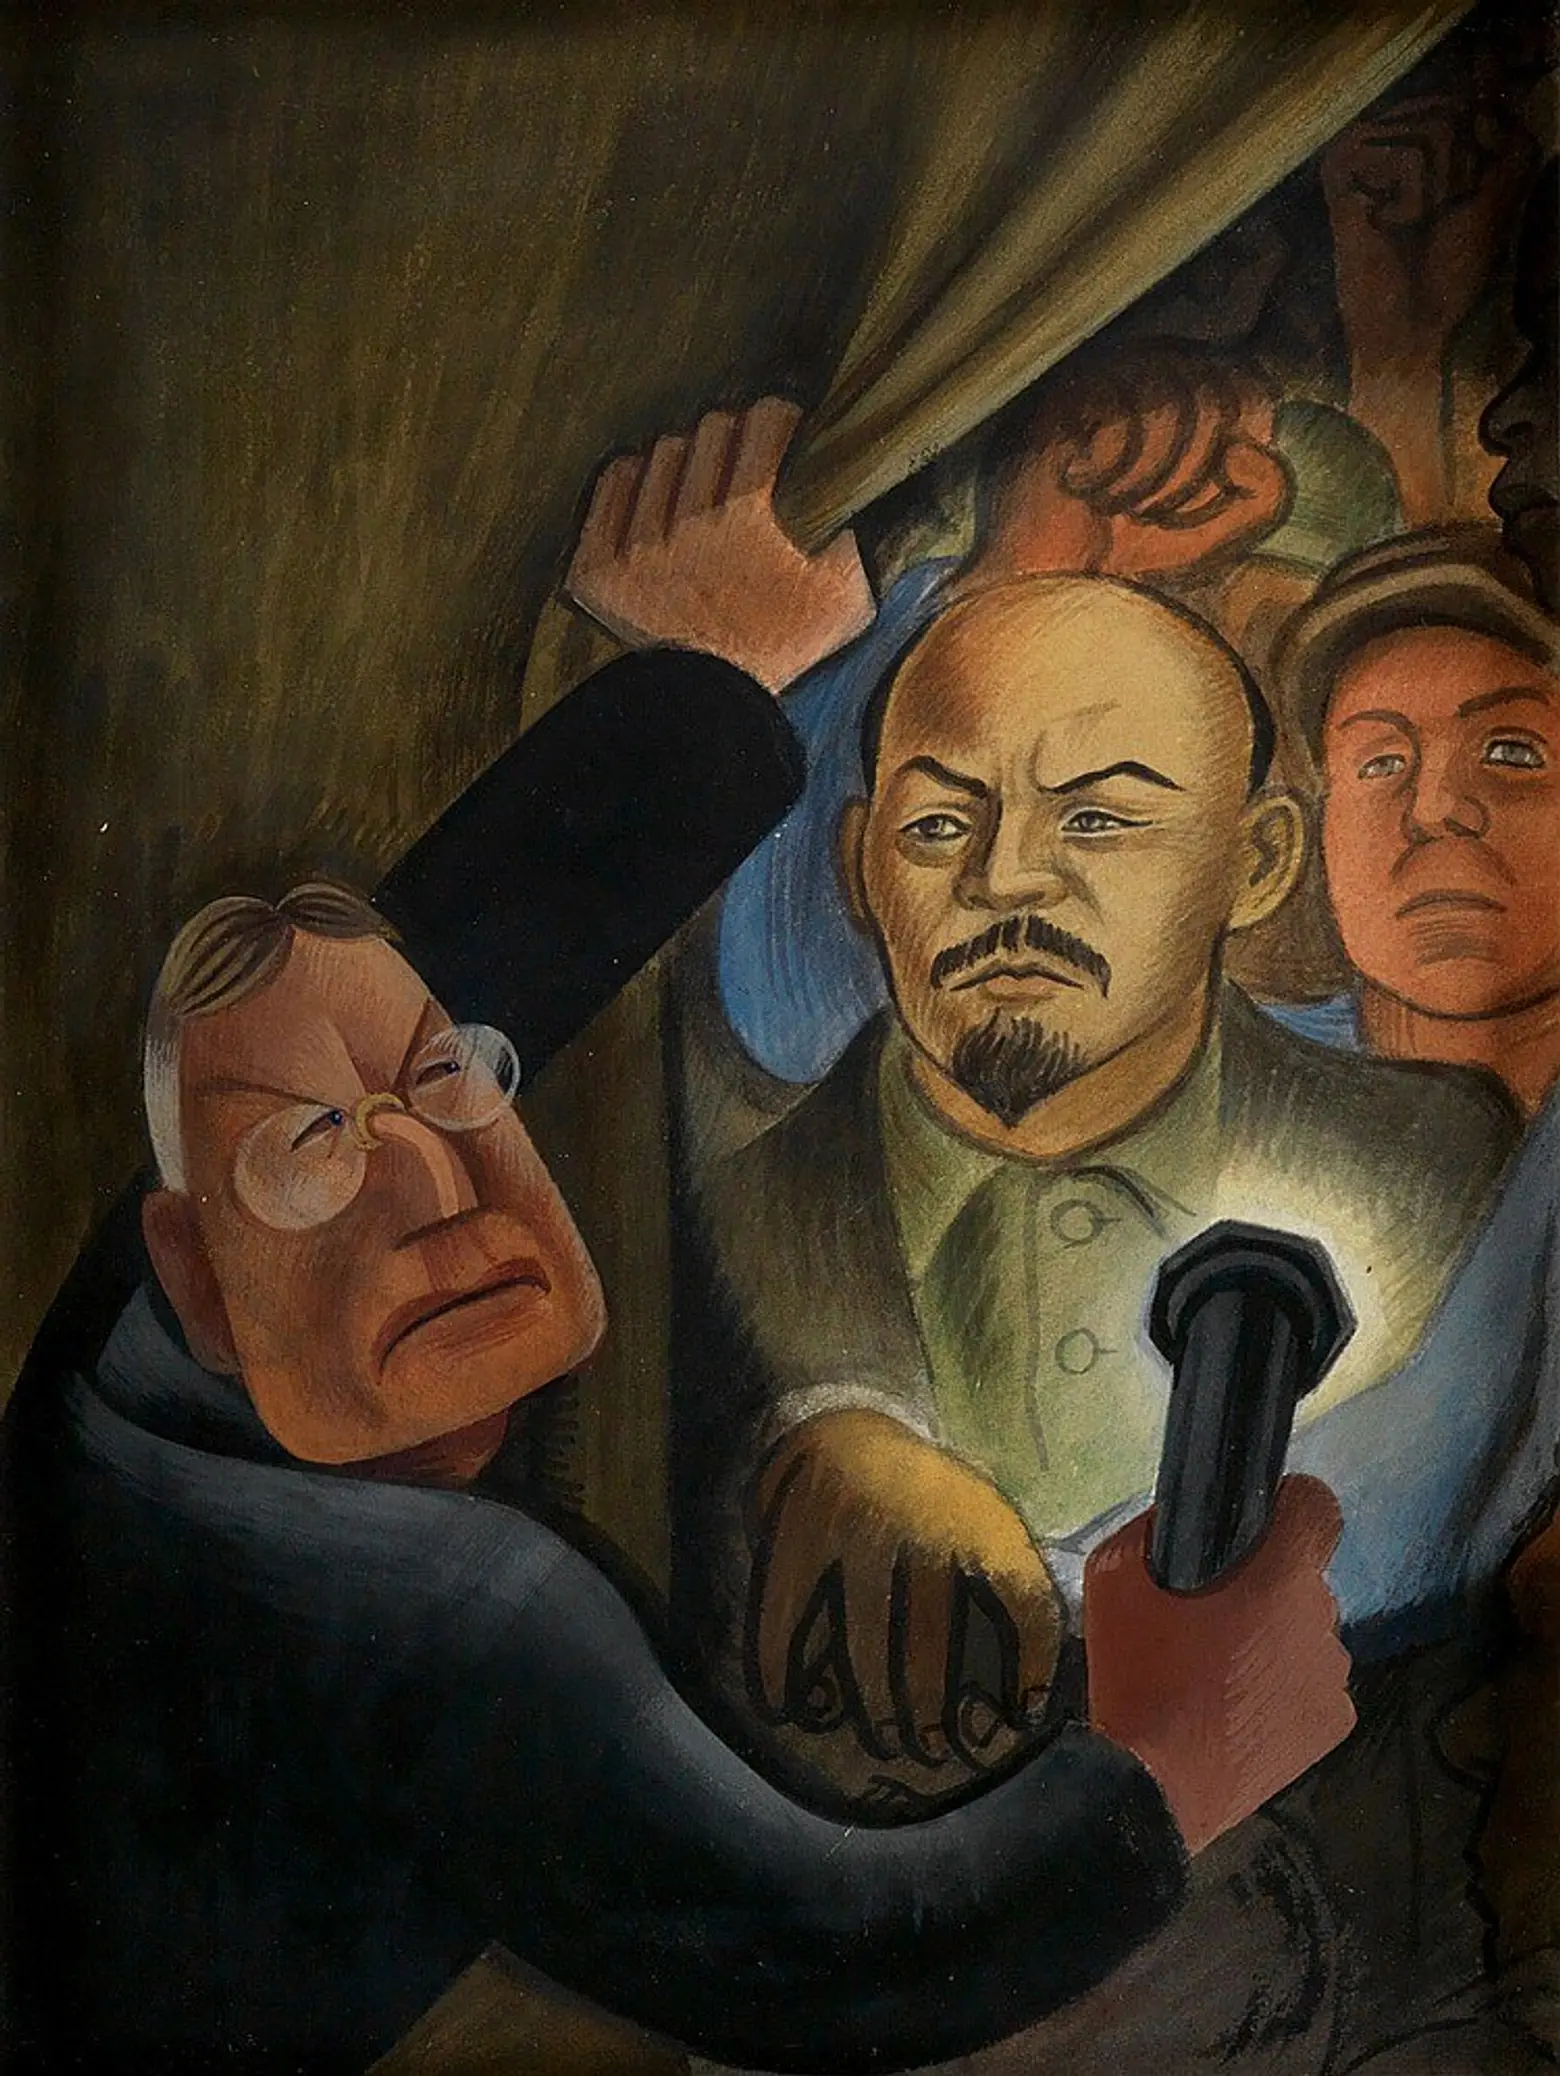 A charicature of John D. Rockefeller, Jr. discovering the controversial portrait of the Soviet Union leader Vladimir Lenin in Rivera’s mural, Man at the Crossroads, at Rockefeller Center, New York. Rivera’s inclusion of Lenin’s portrait so incensed Rockefeller that he ordered Rivera to stop work and the murals were destroyed before their completion.